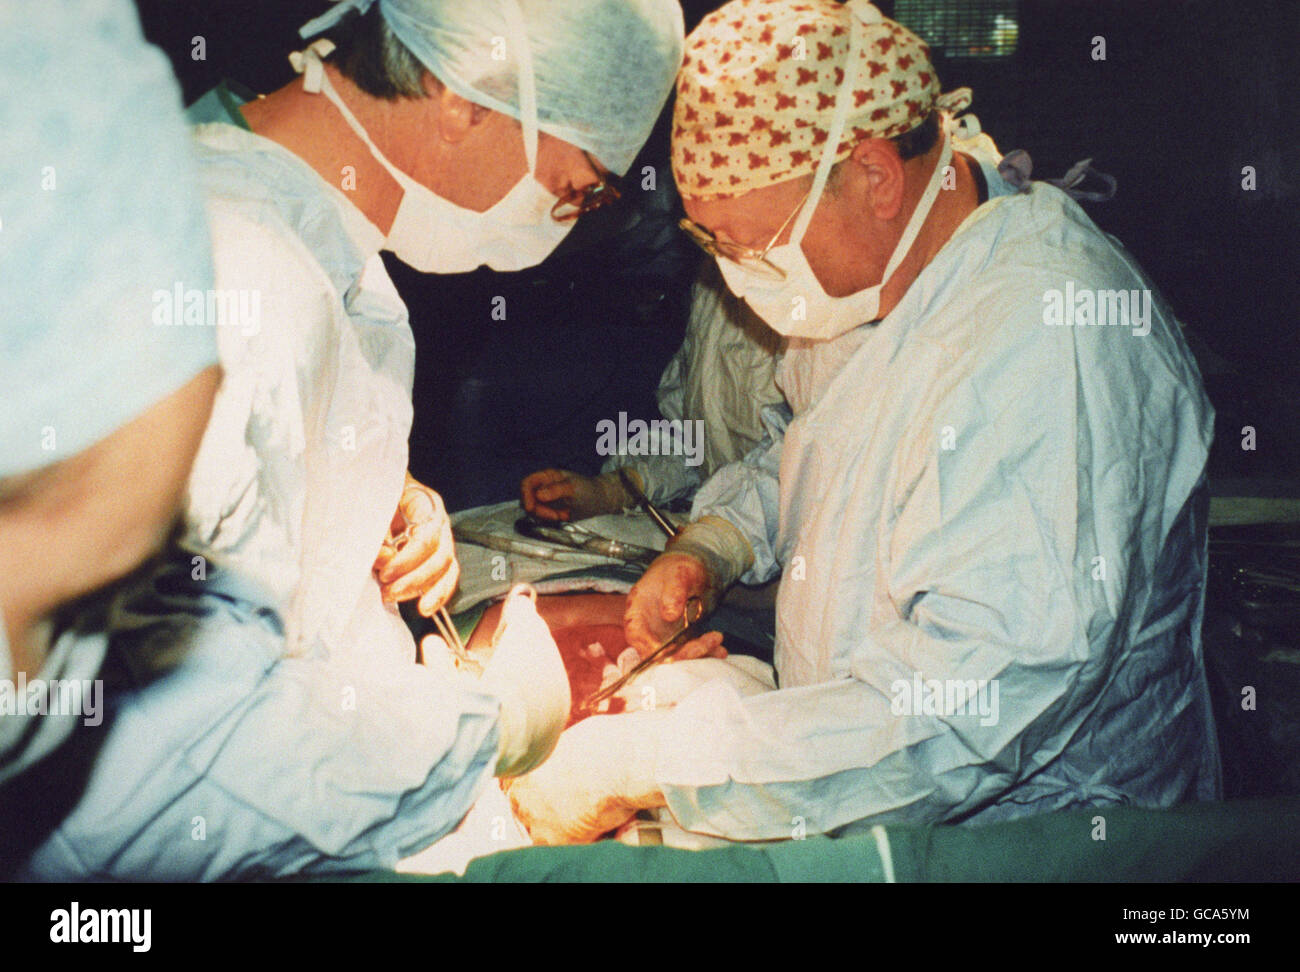 SURGICAL TEAM MEMBERS IMPLANT A A NEW HEART ASSIST DEVICE, KNOWN AS A LEFT VENTRICULAR ASSIST DEVICE [LVAD], DURING A FOUR HOUR OPERATION AT PAPWORTH HOSPITAL IN CAMBRIDGESHIRE. Stock Photo